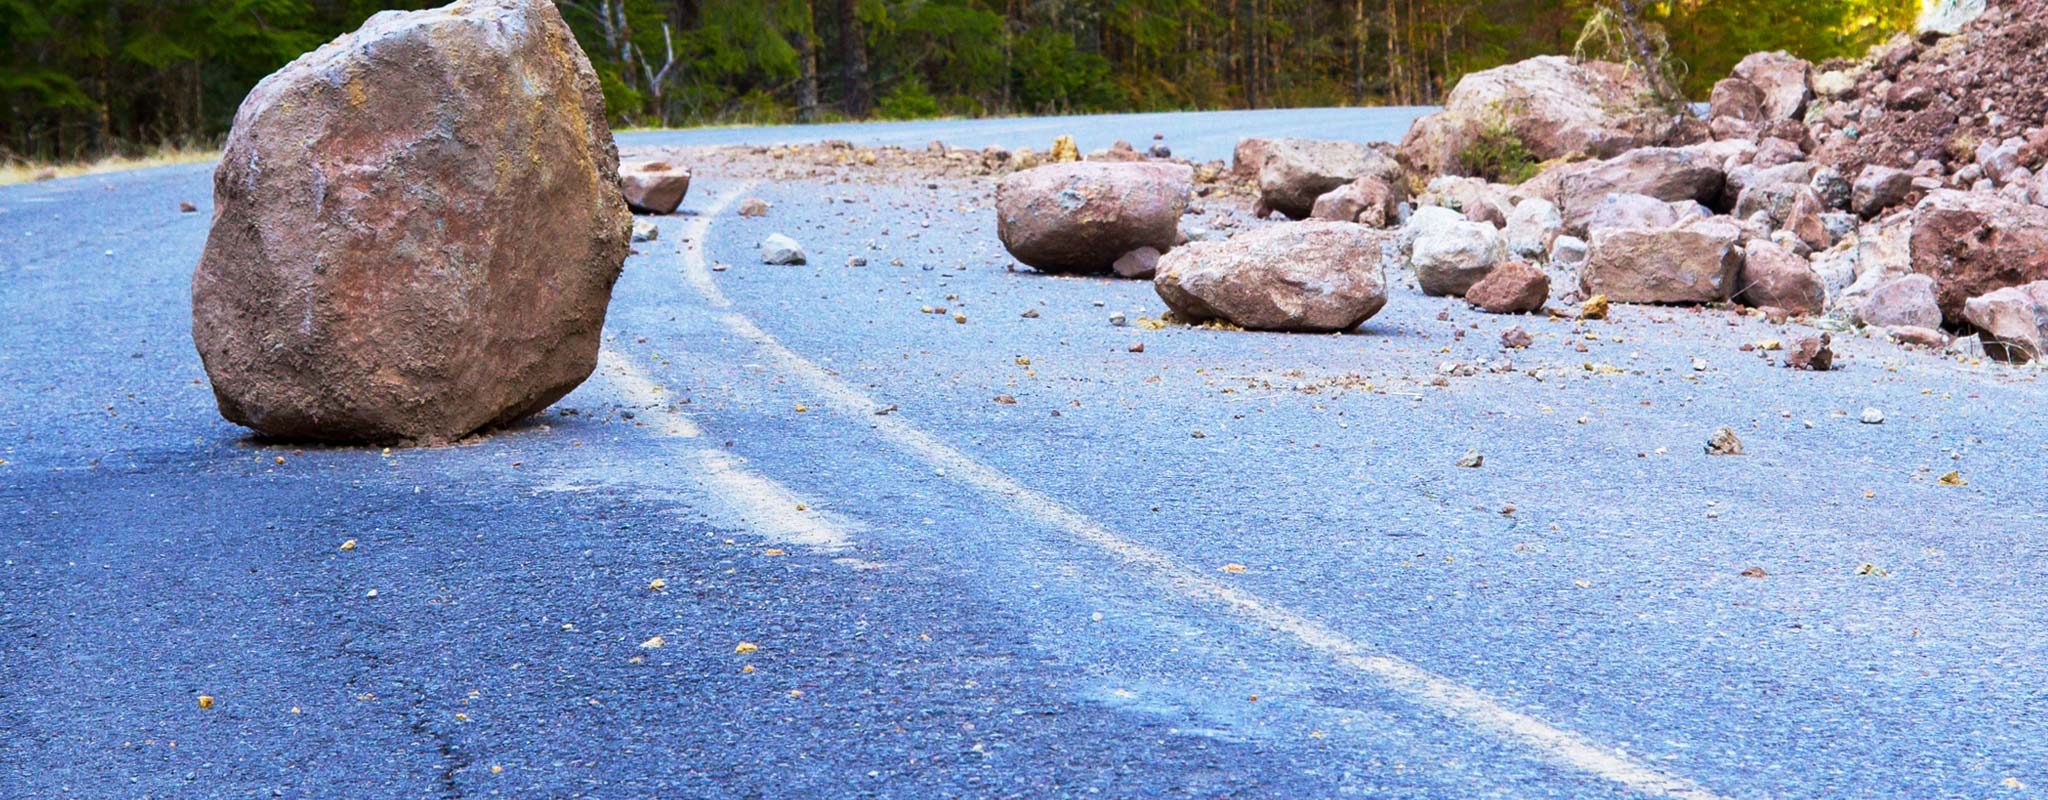 A rock slide with large boulders in the middle of a road.